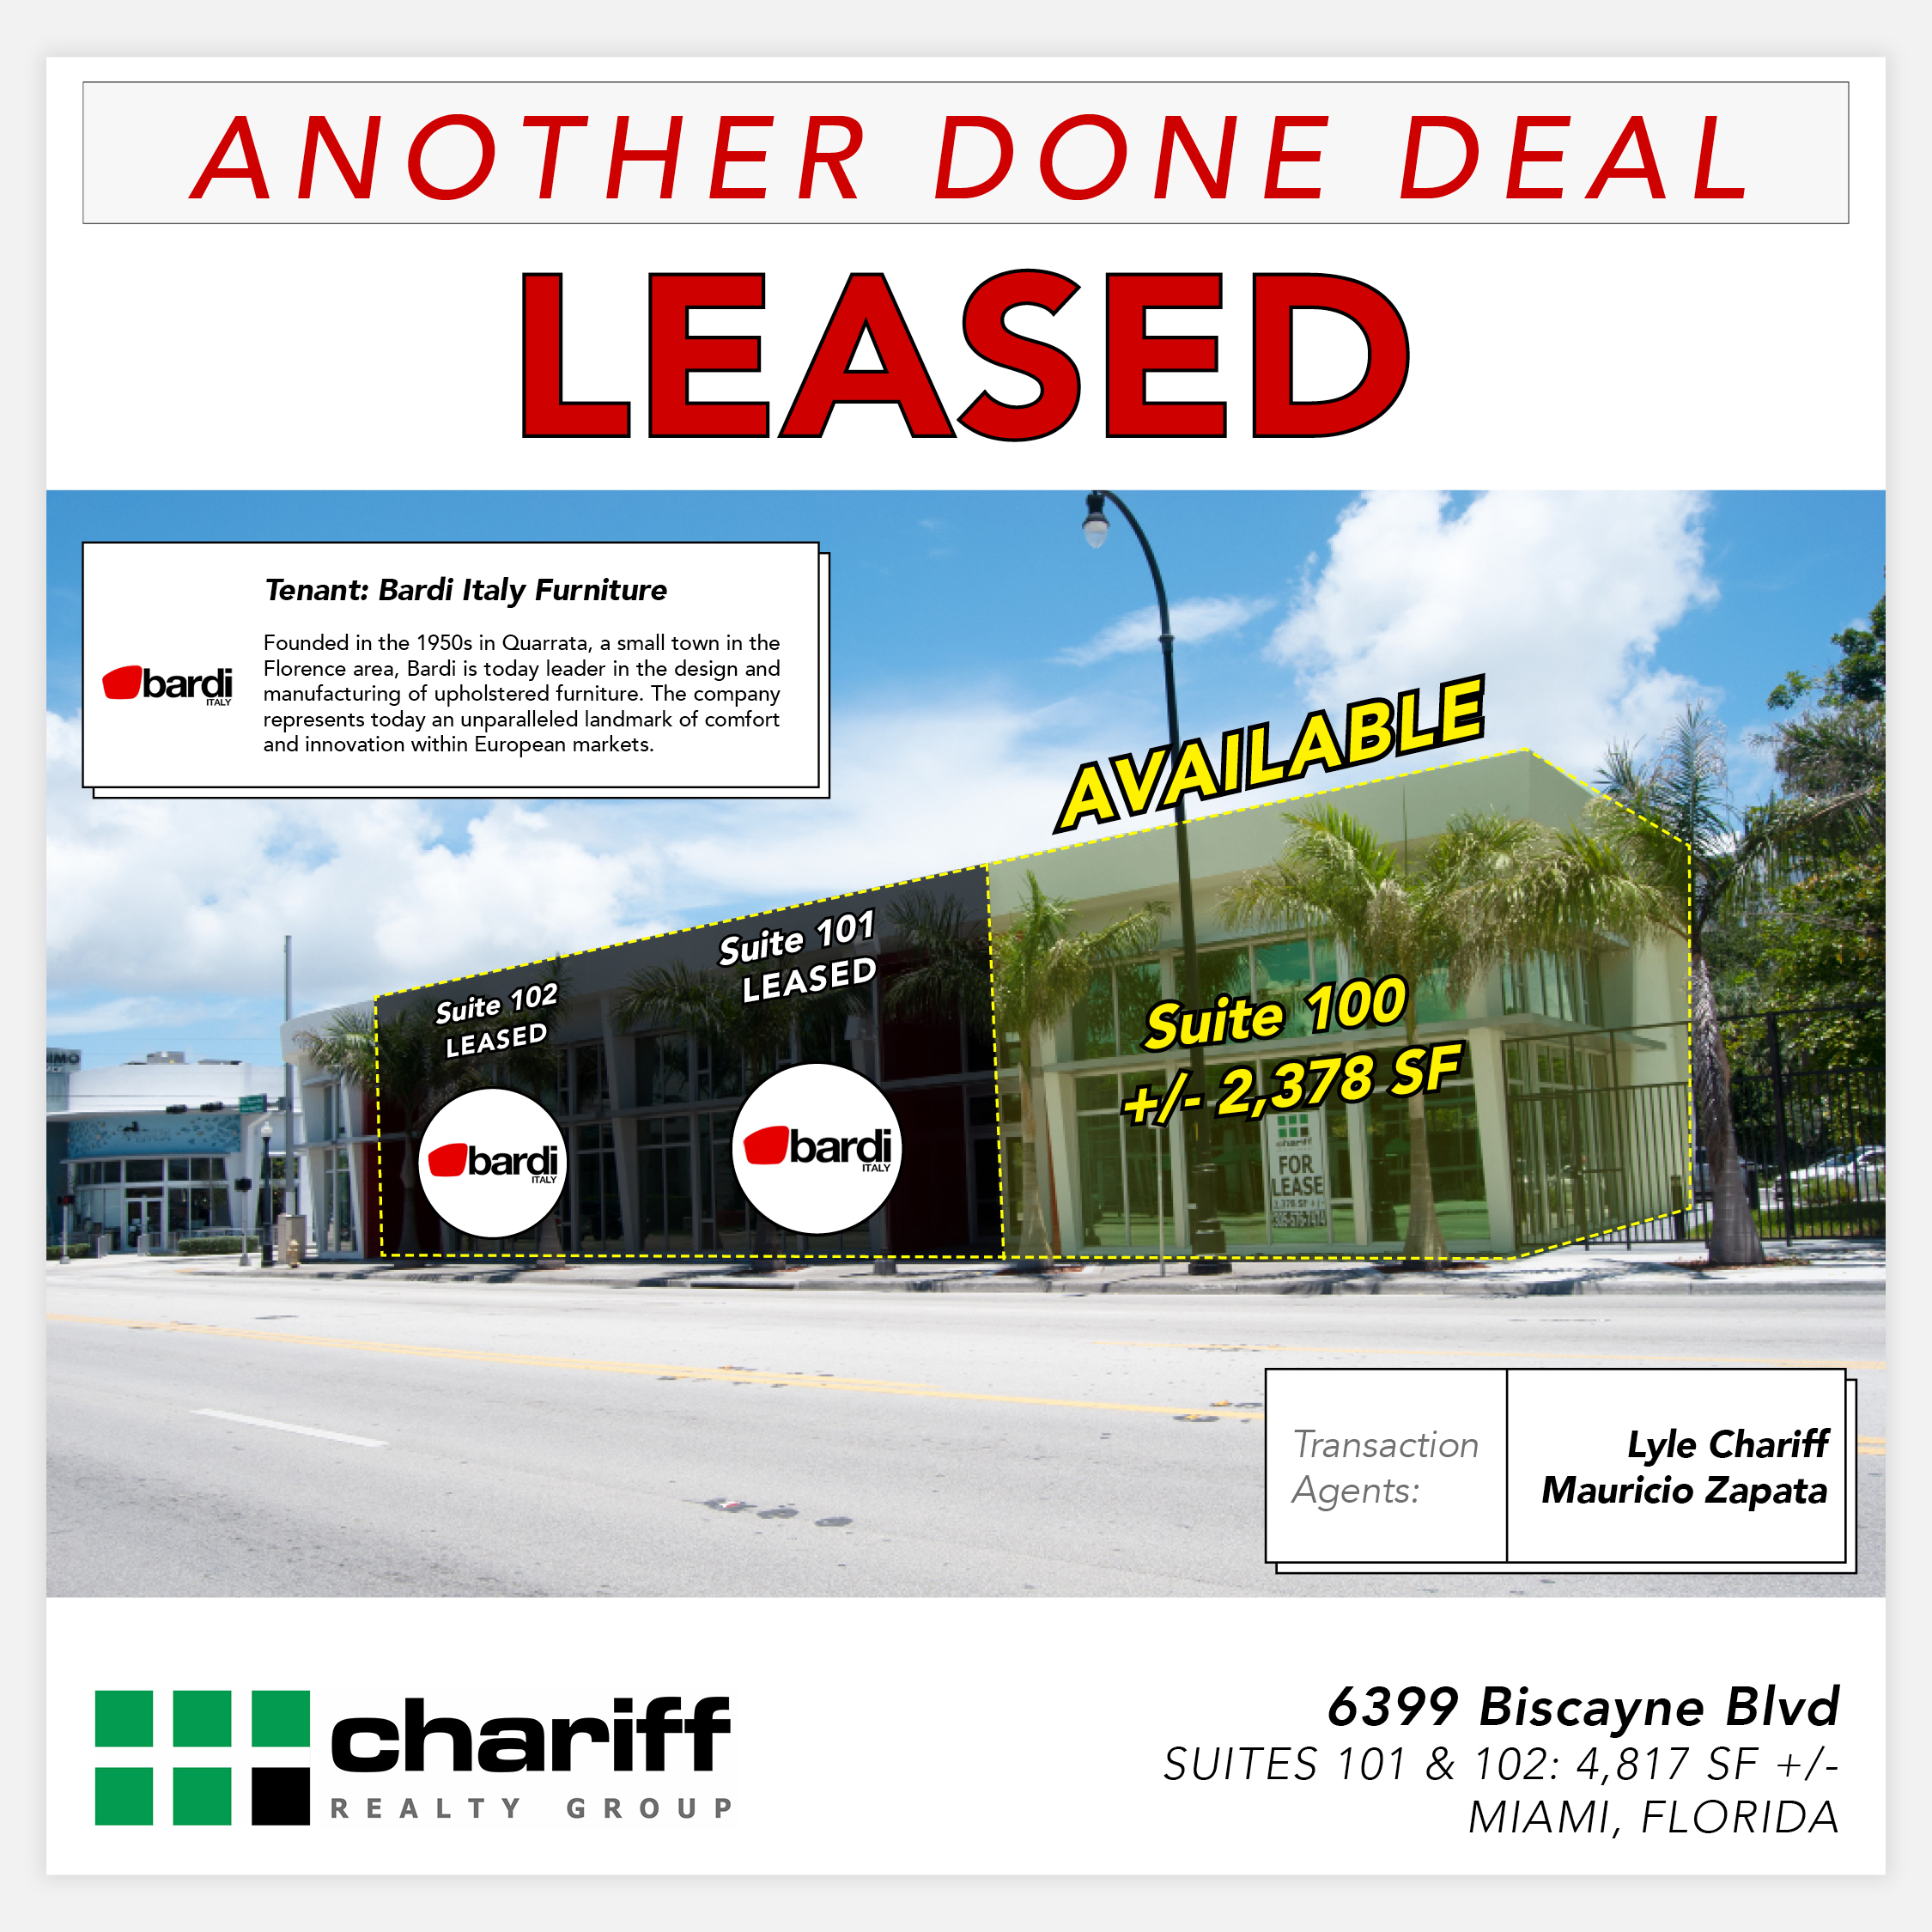 6399 Biscayne Blvd - Another Done Deal - Leased - Mimo District - Miami Florida